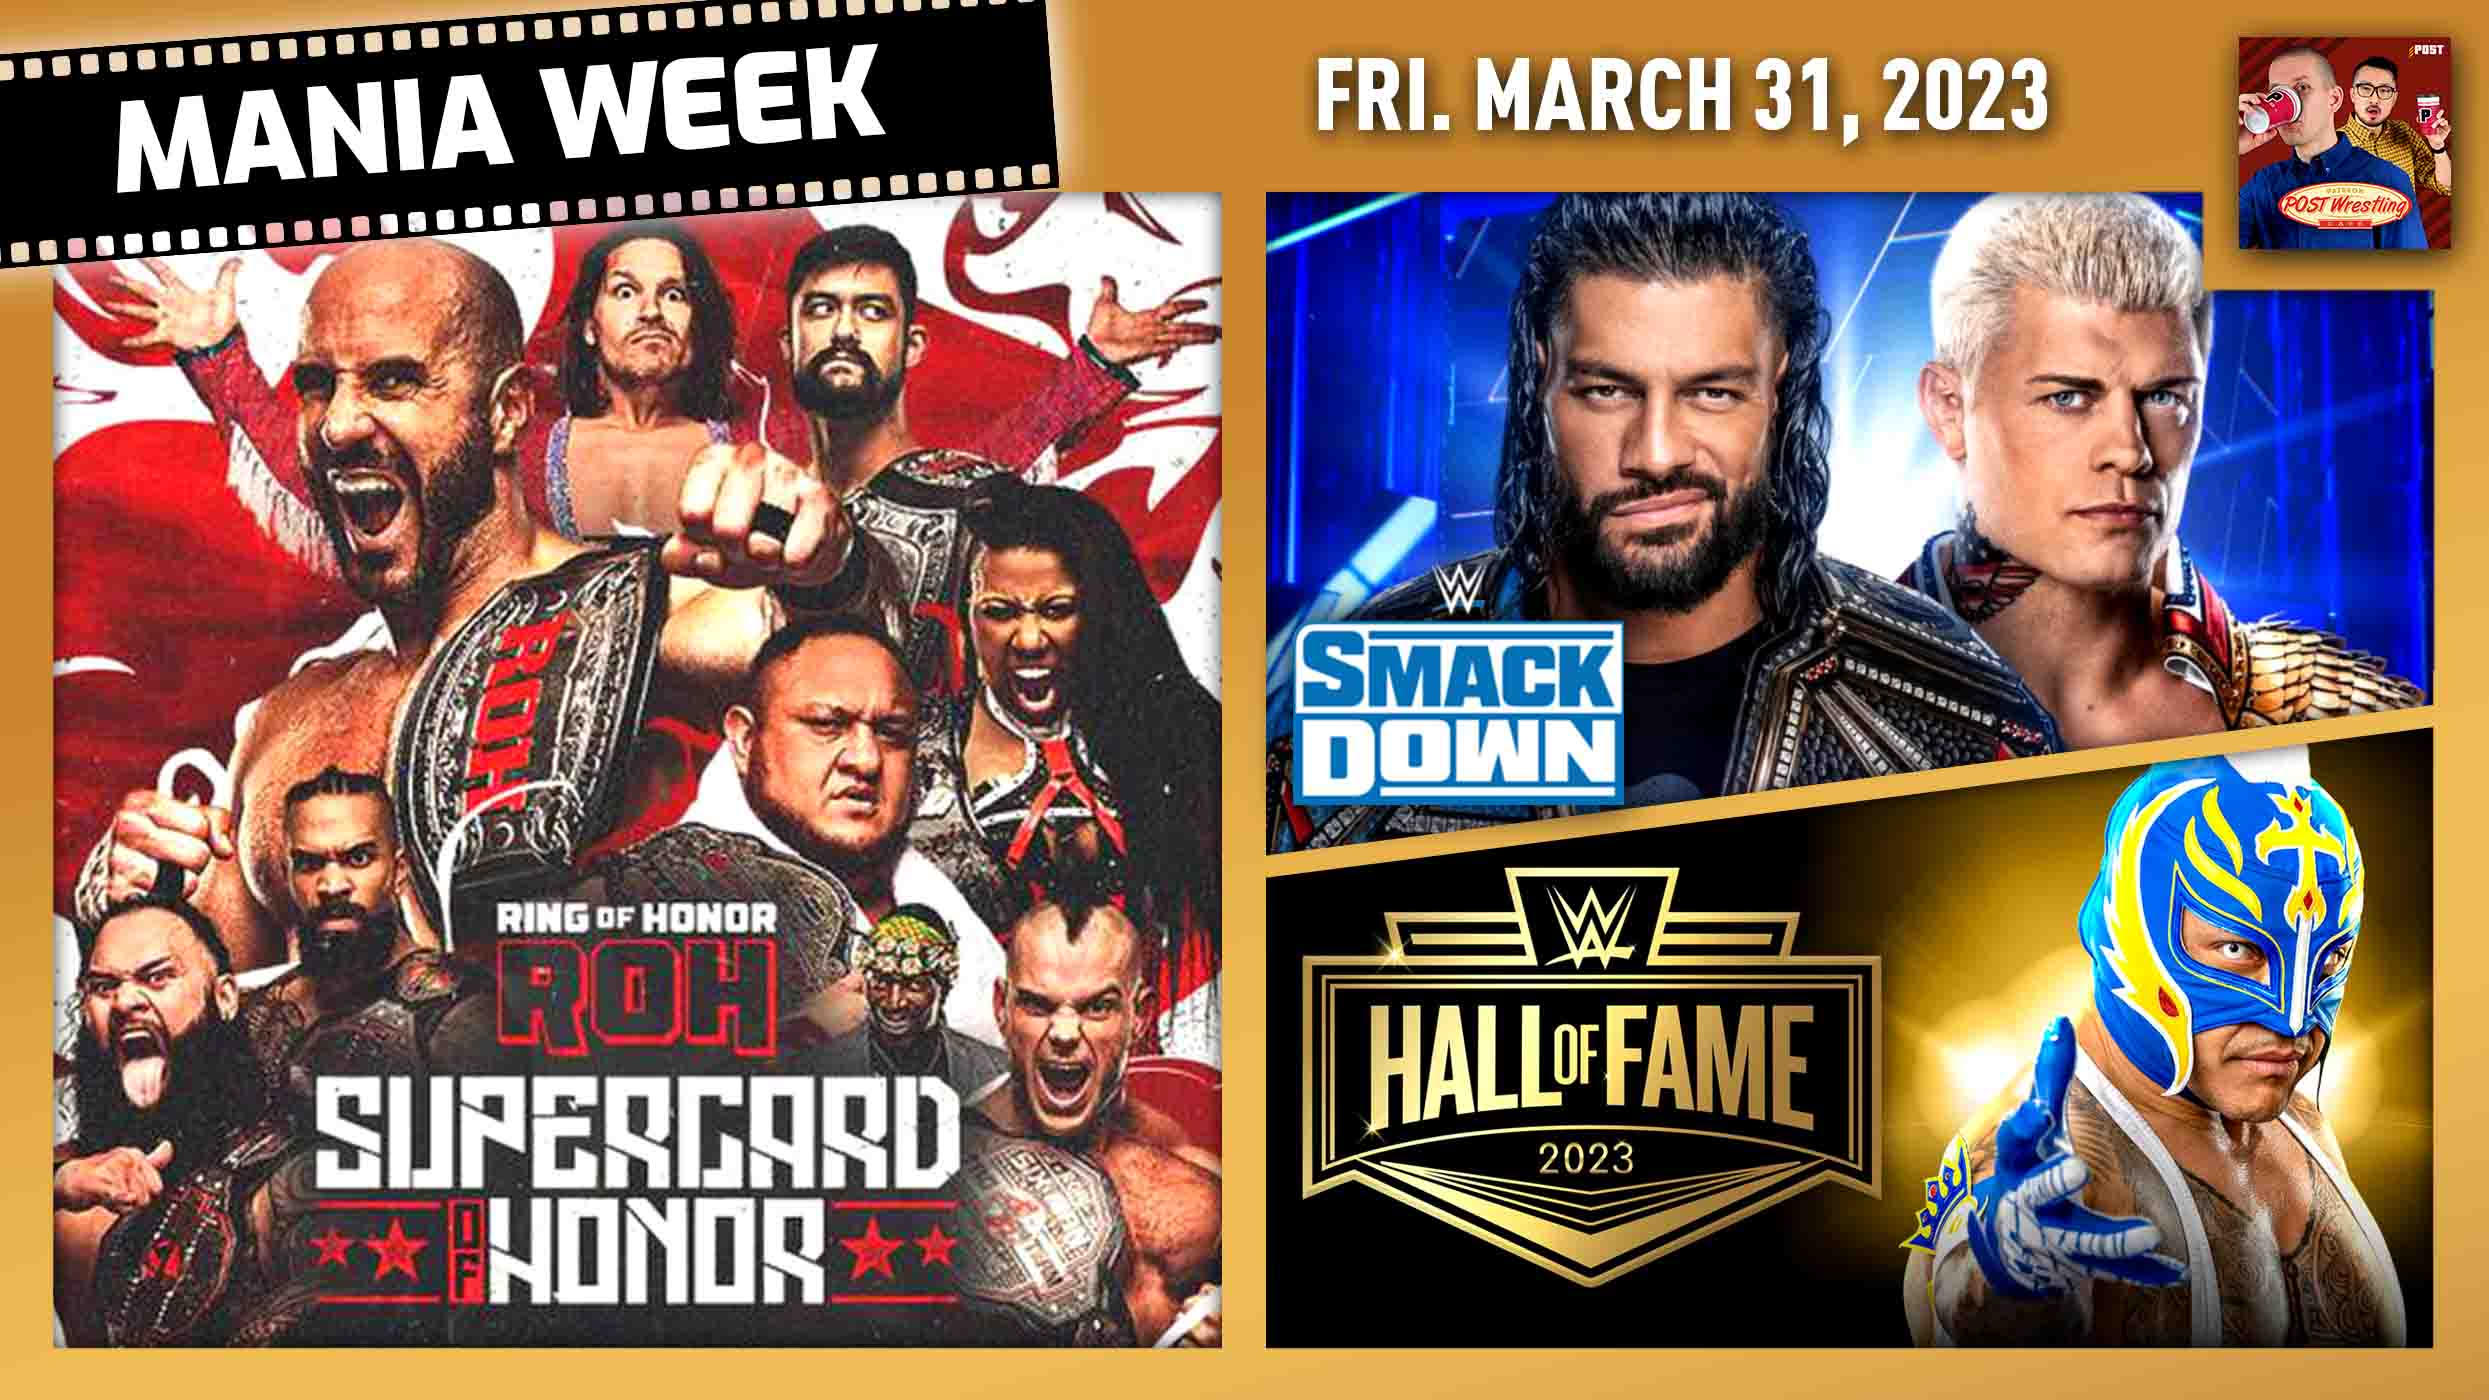 ROH Supercard of Honor, WWE SmackDown & Hall of Fame MANIA WEEK